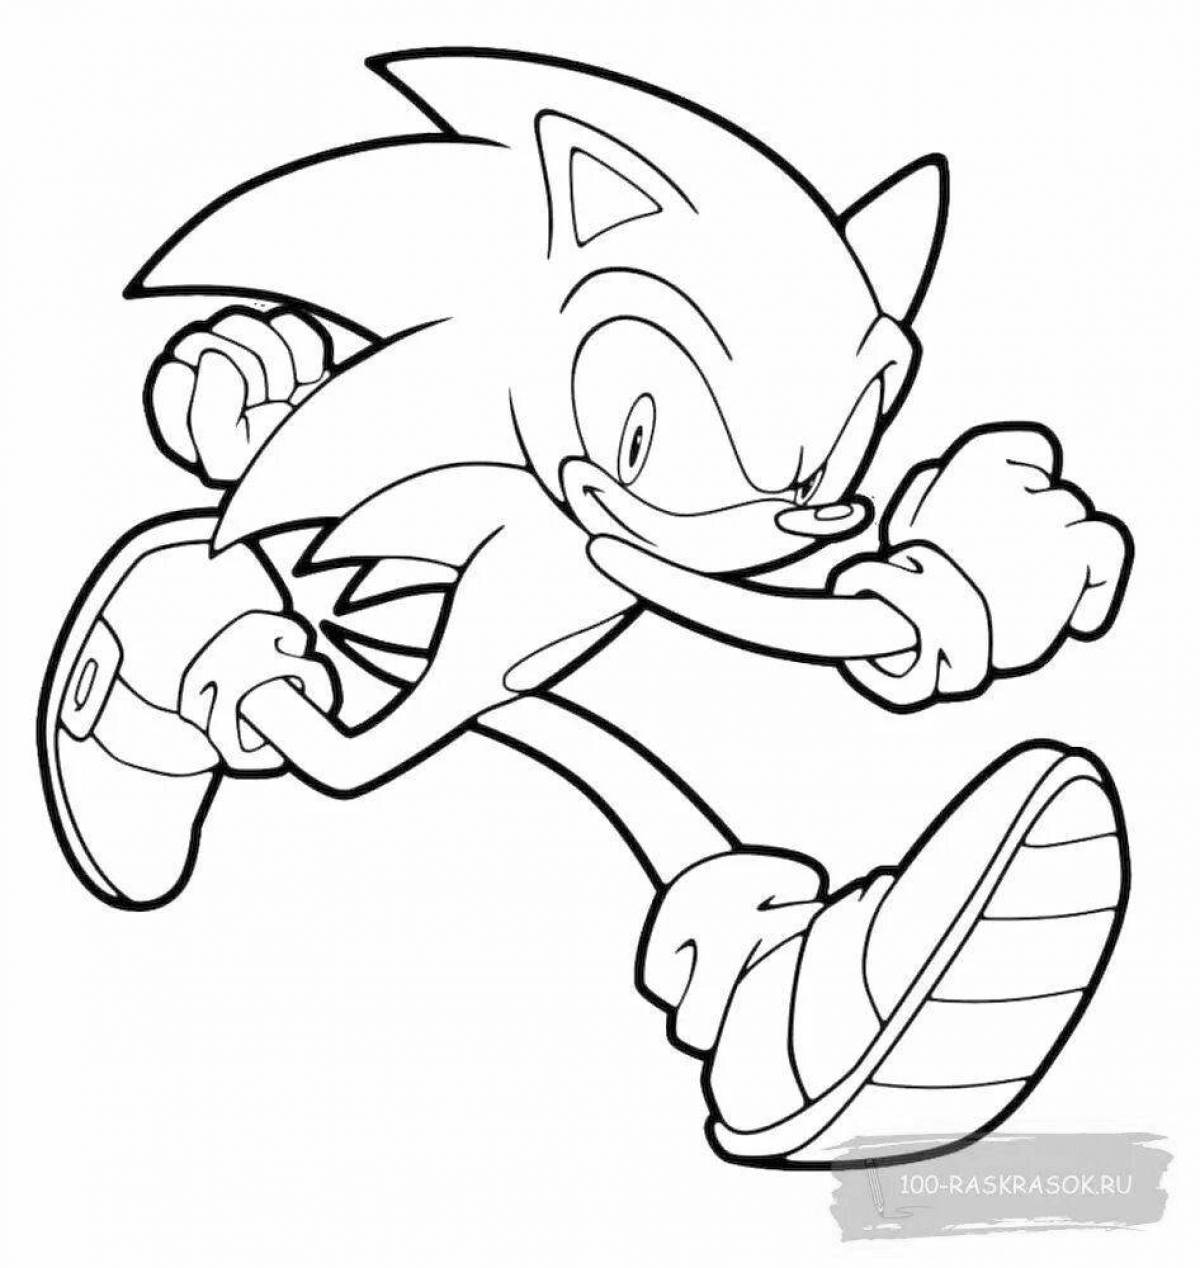 Excellent sonic boom coloring